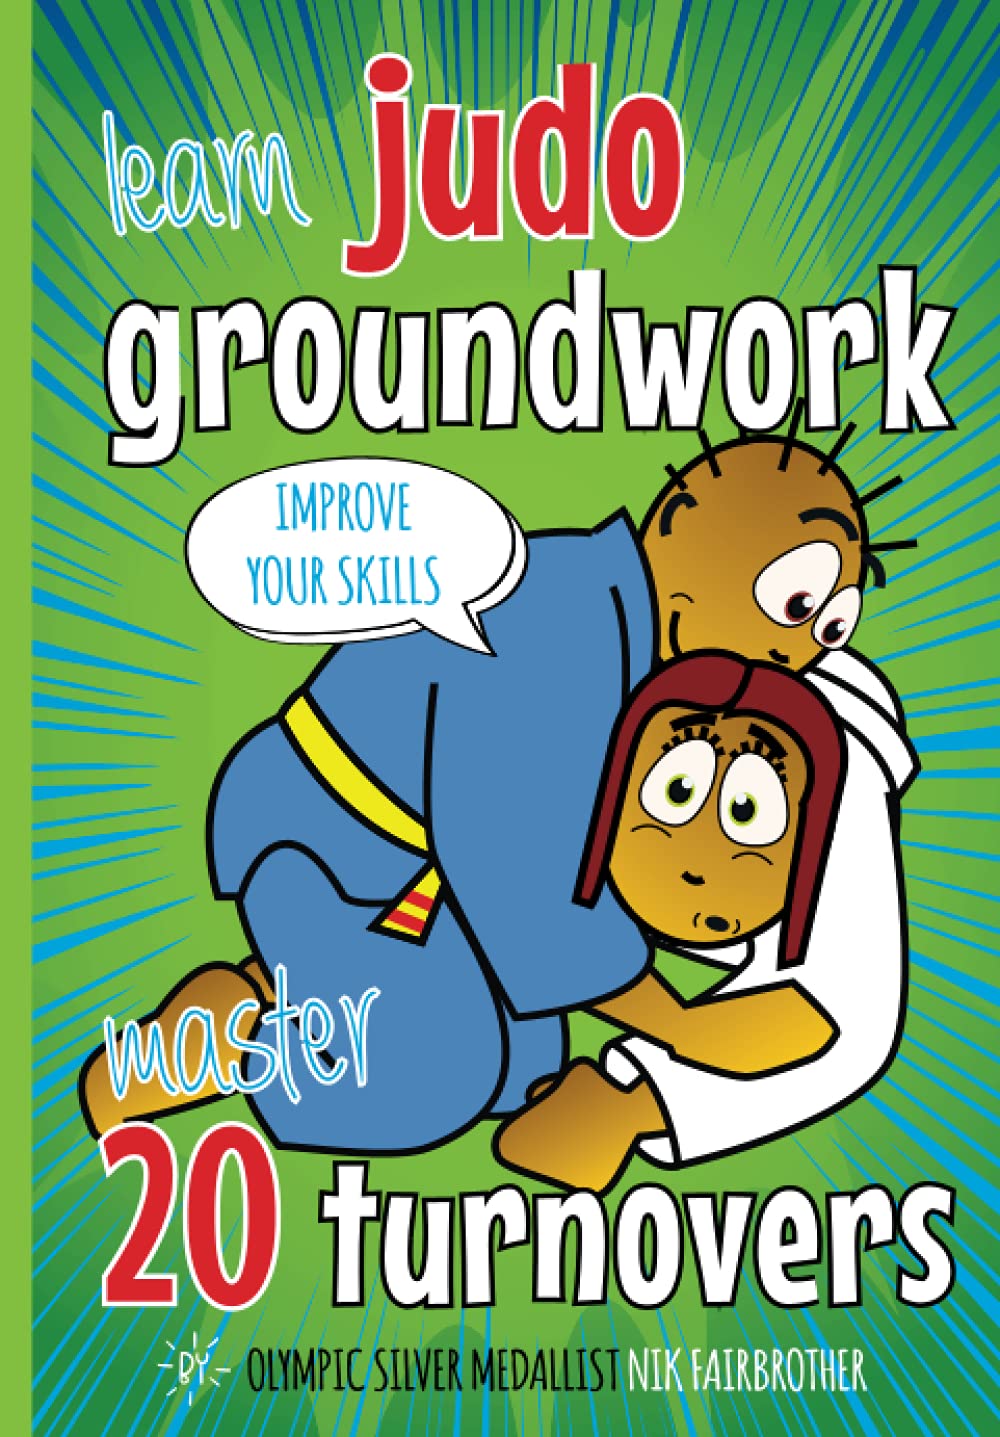 20 Judo Turnovers: Learn Groundwork: Children’s Judo Book: How to do Groundwork Step by Step (Koka Kids Judo Books by Nik Fairbrother)